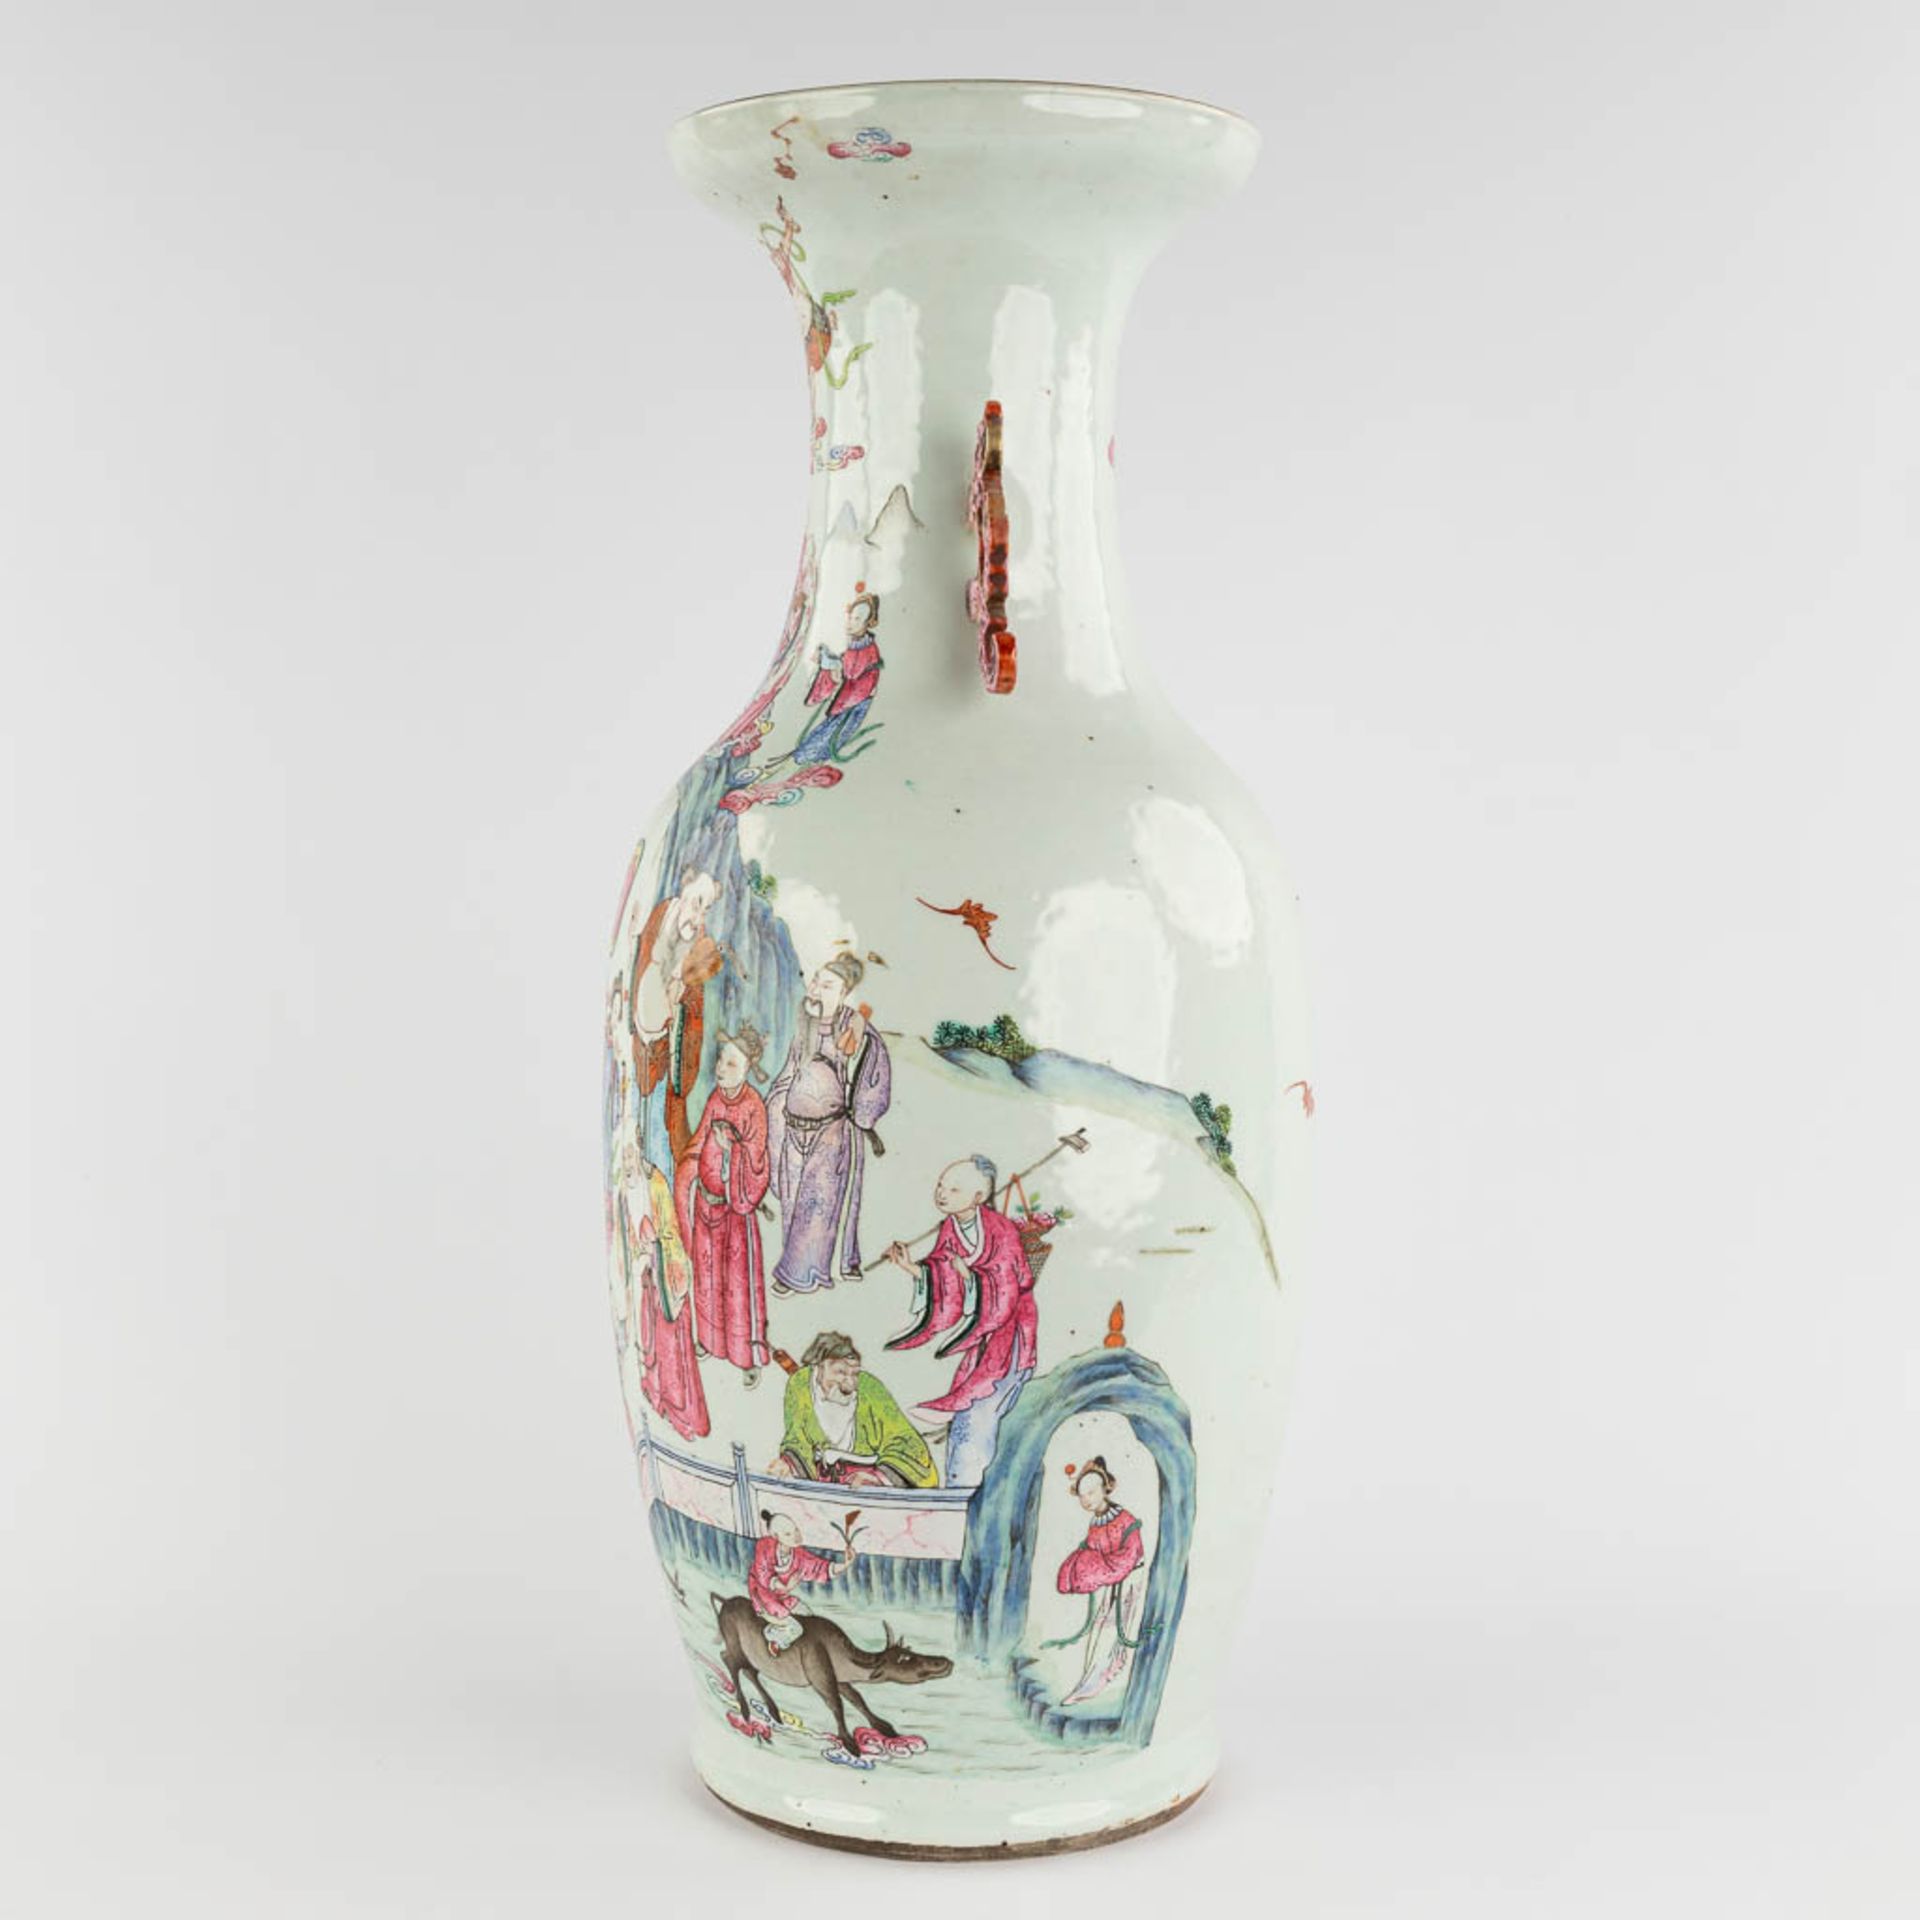 A Chinese Famille Rose vase, decorated with Wise men and items of good fortune. 19th C. (H:60 x D:25 - Image 6 of 18